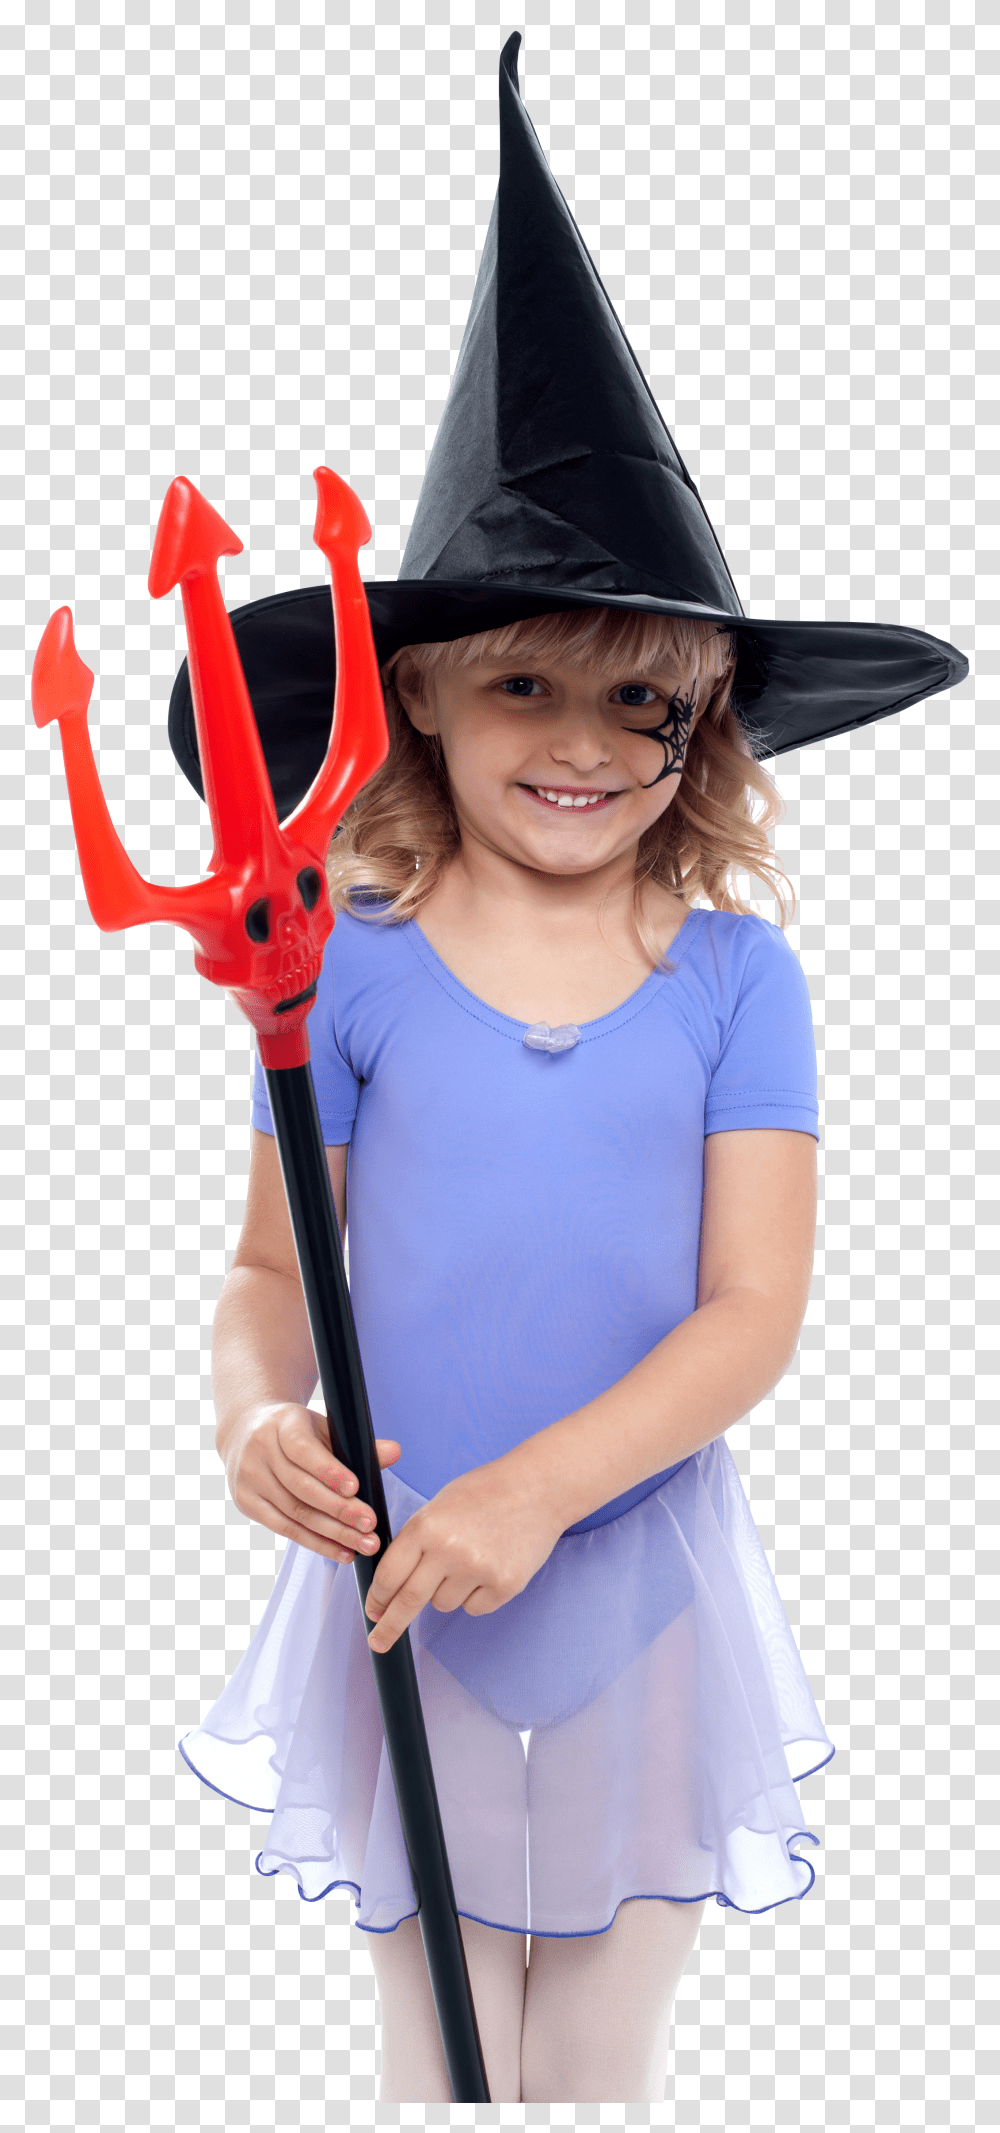 Child Girl Images Background Play Kid Girl In Halloween Costume Background Transparent Png